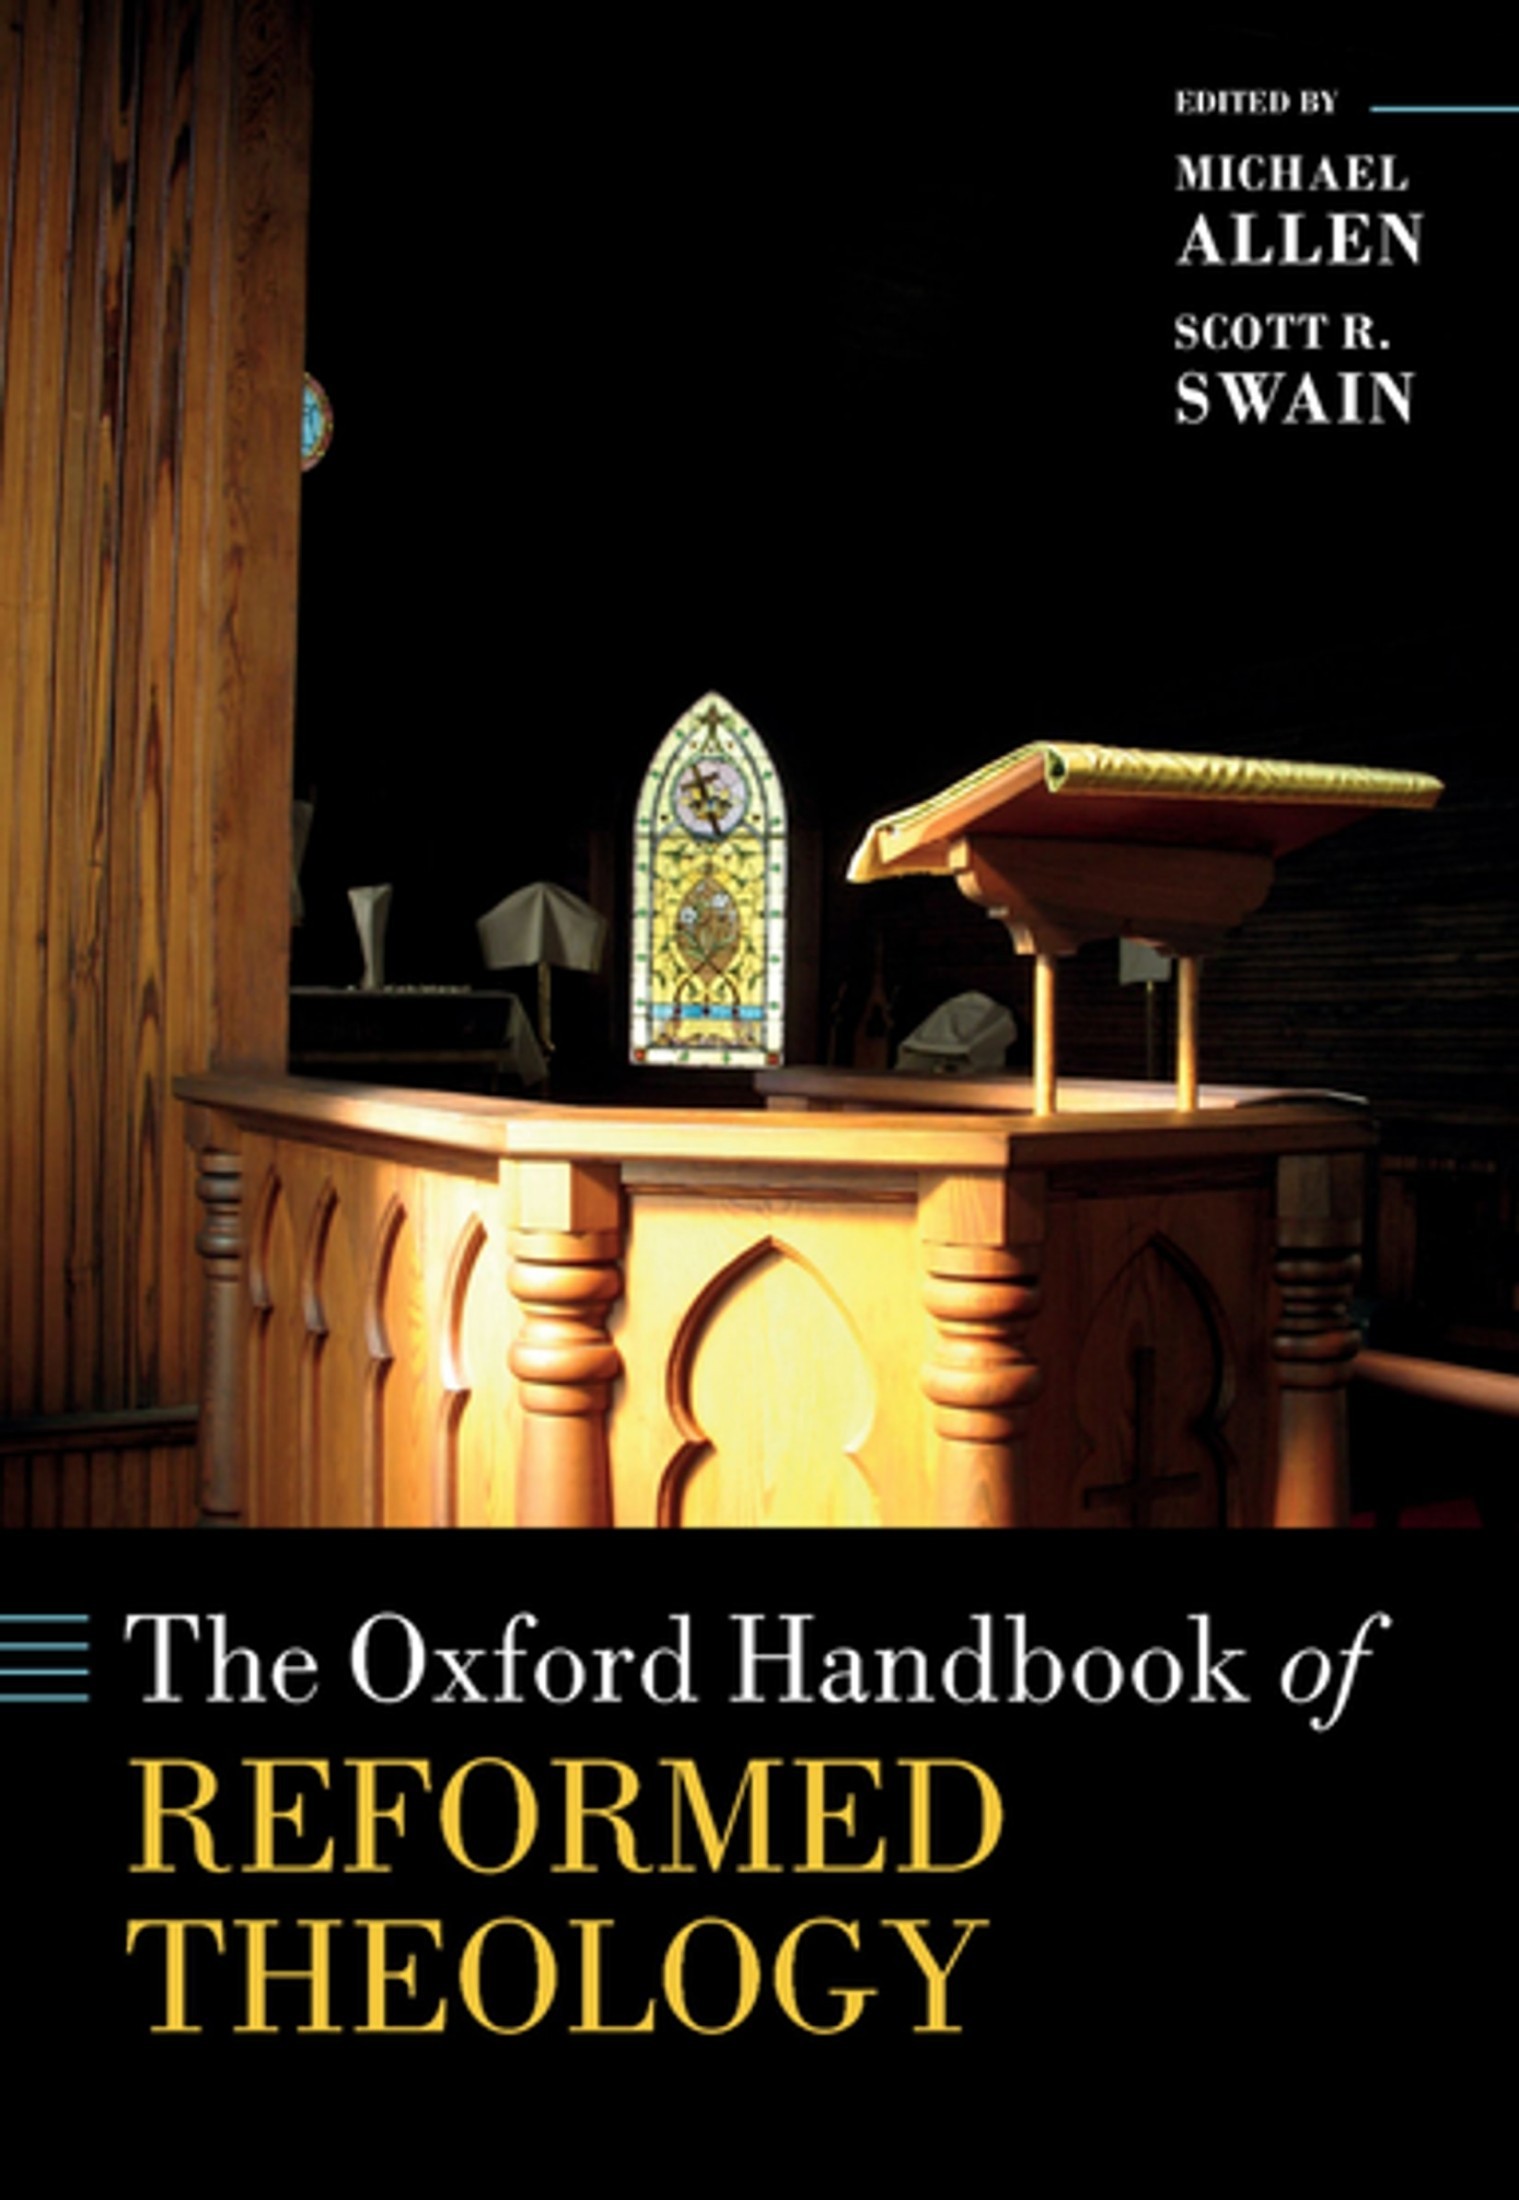 The Oxford Handbook of Reformed Theology